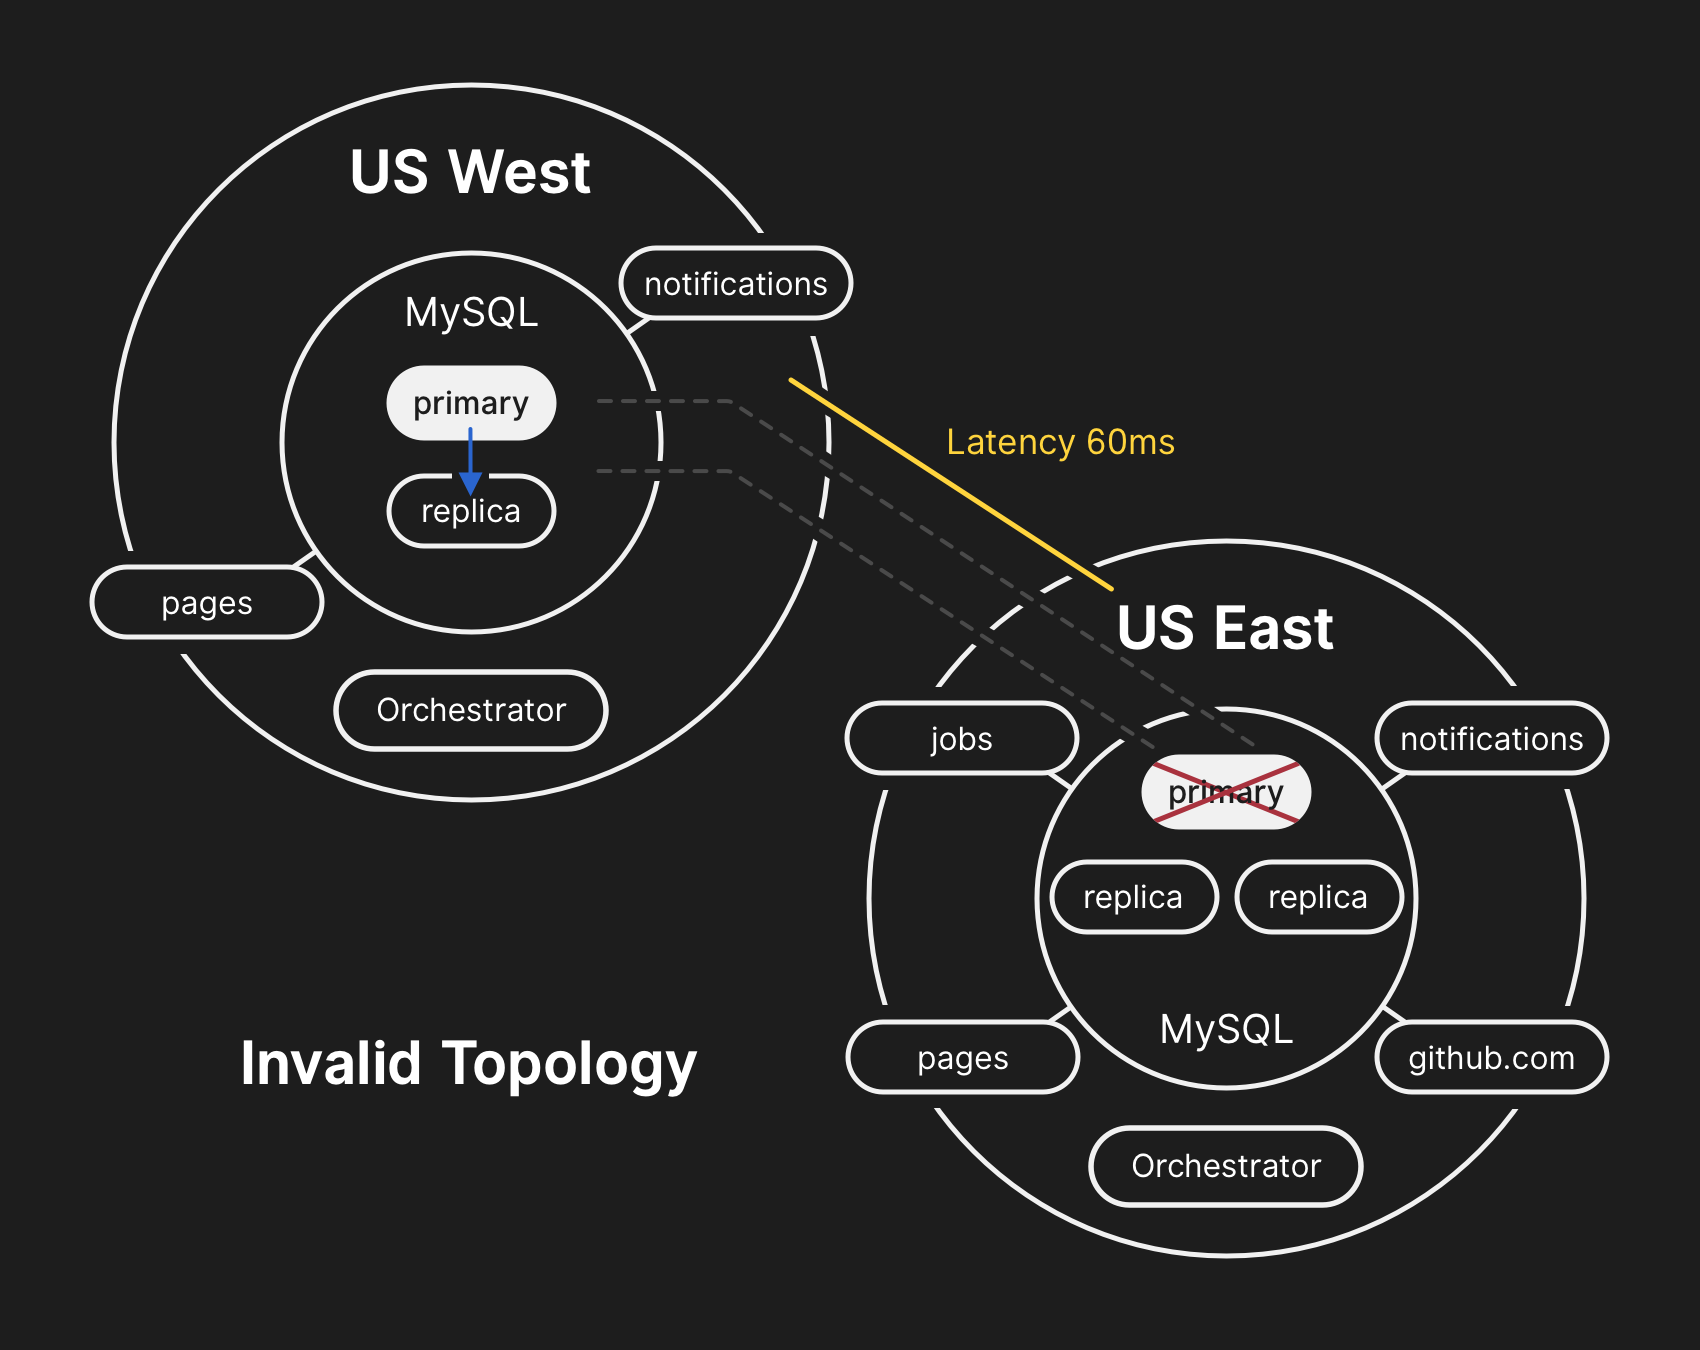 In the invalid topology, replication from US West to US East is broken and apps are unable to read from current replicas as they depend on low latency to maintain transaction performance.